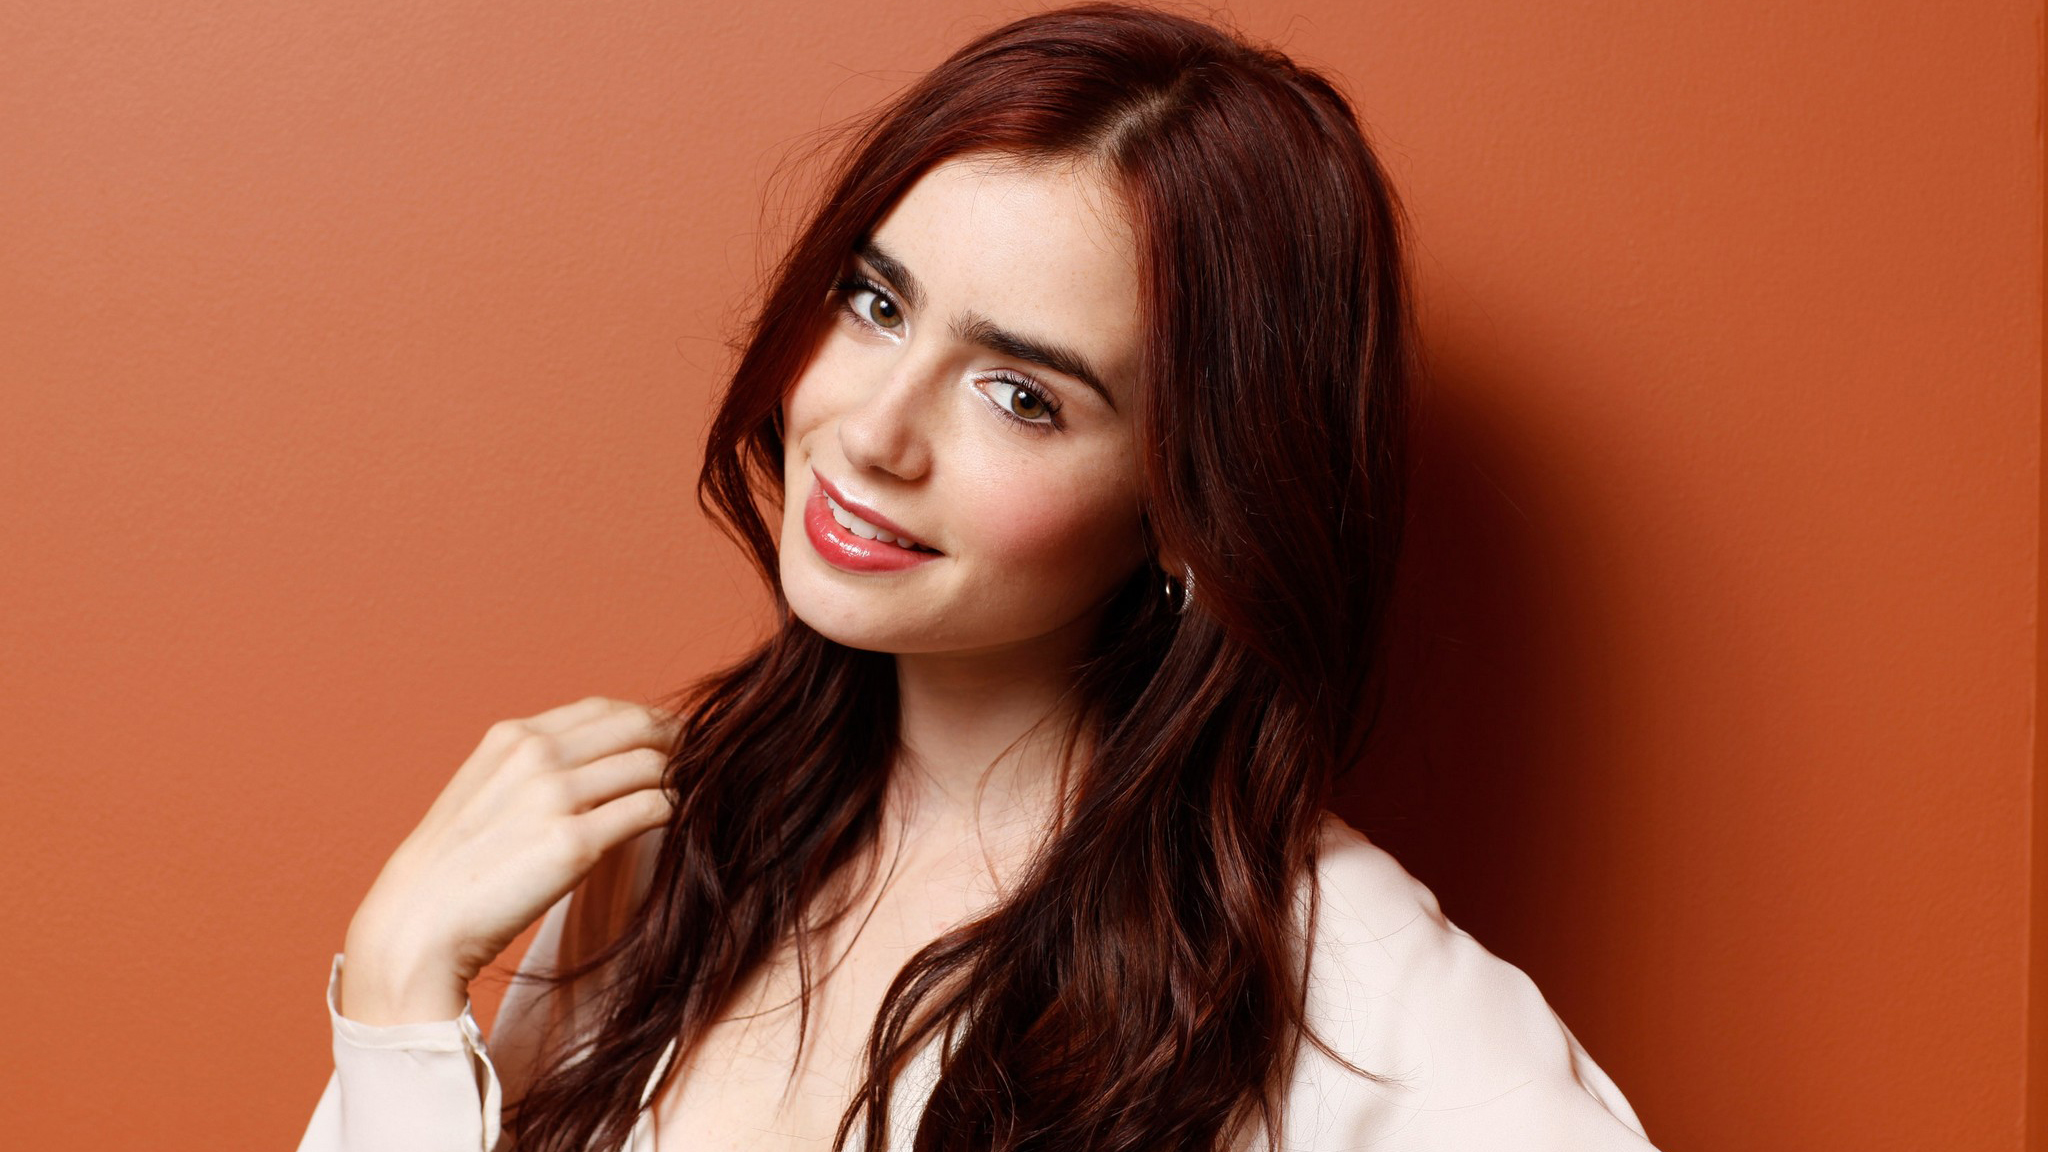 People 2048x1152 Lily Collins actress celebrity brunette women redhead portrait red lipstick happy smiling red background young women looking at viewer British studio British women simple background